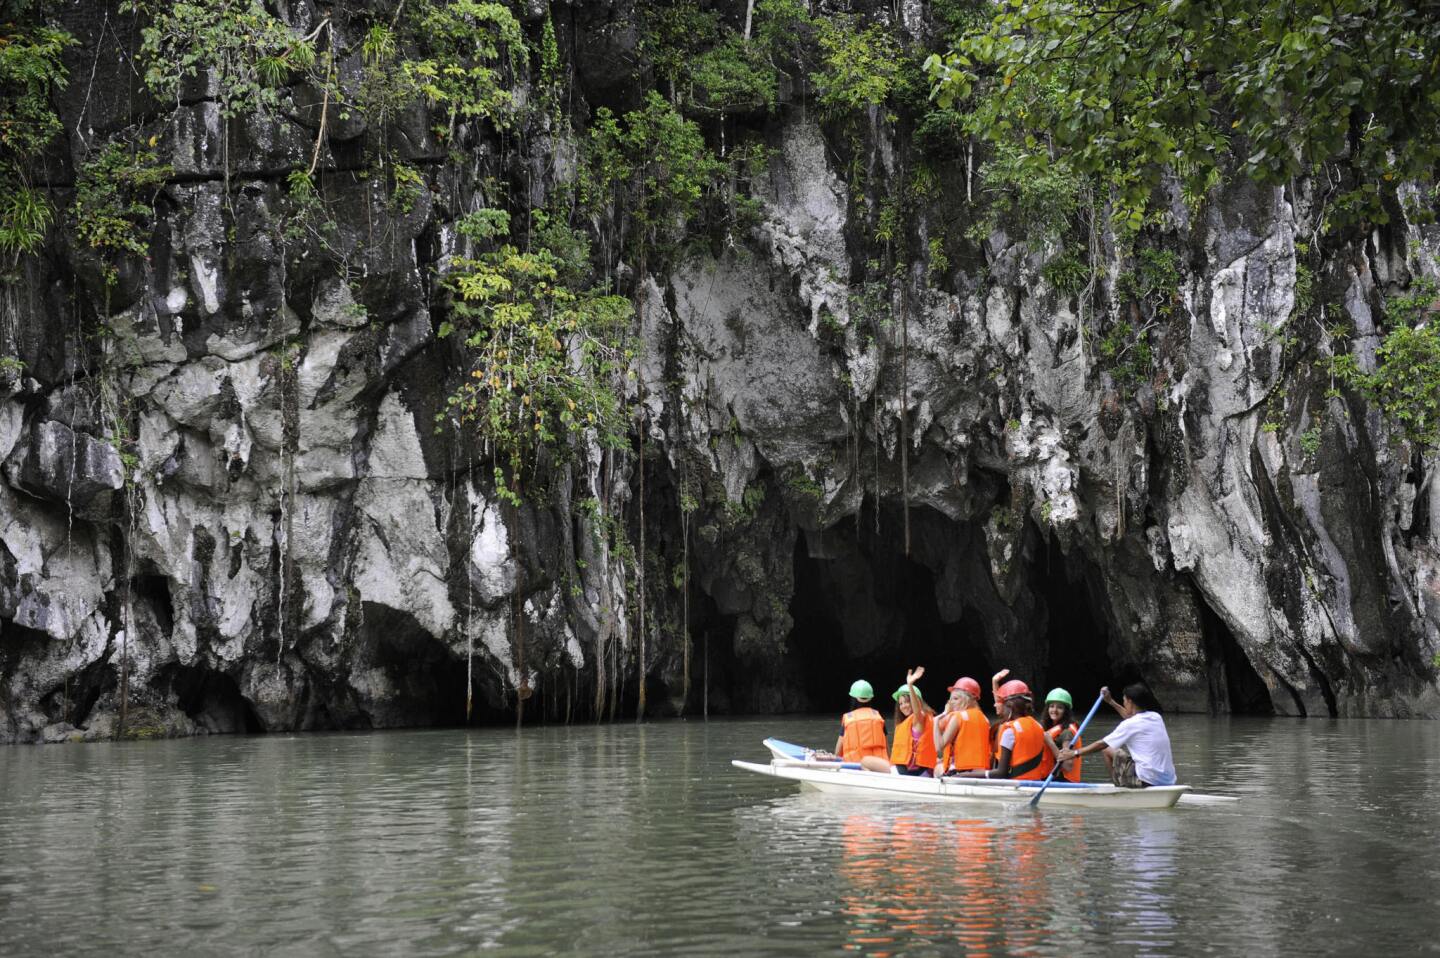 The next time you are in the Philippines, take a pump boat trip from Sabang Beach down the clear waters of an underground river that flows through caves filled with interesting formations of stalactites and stalagmites. More photos...